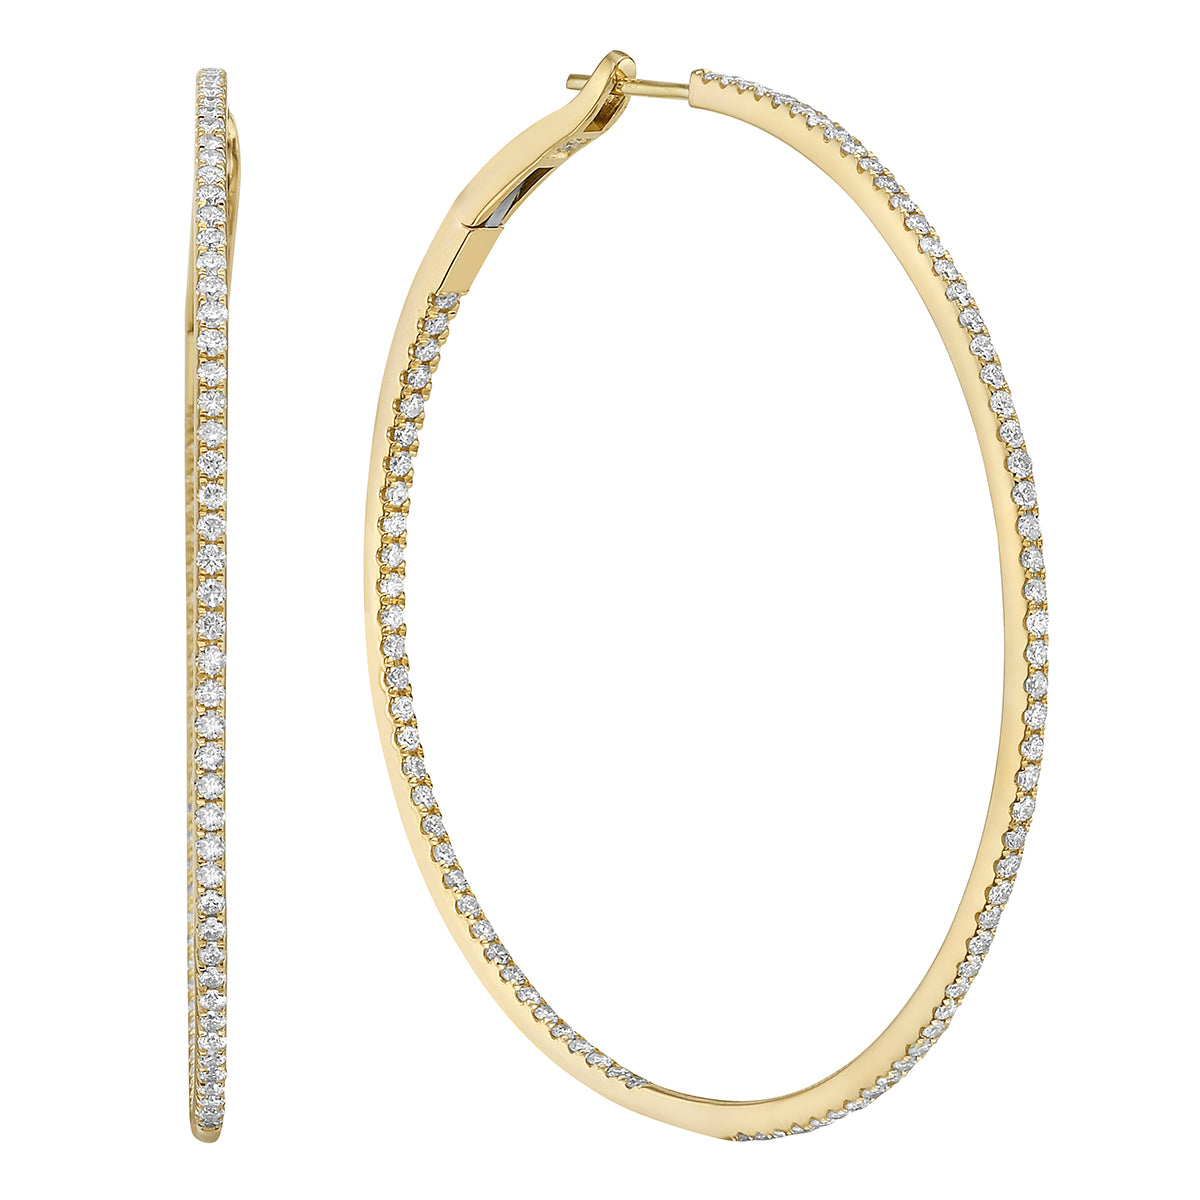 2.0 in Yellow Gold Inside and Out Diamond Hoop Earrings